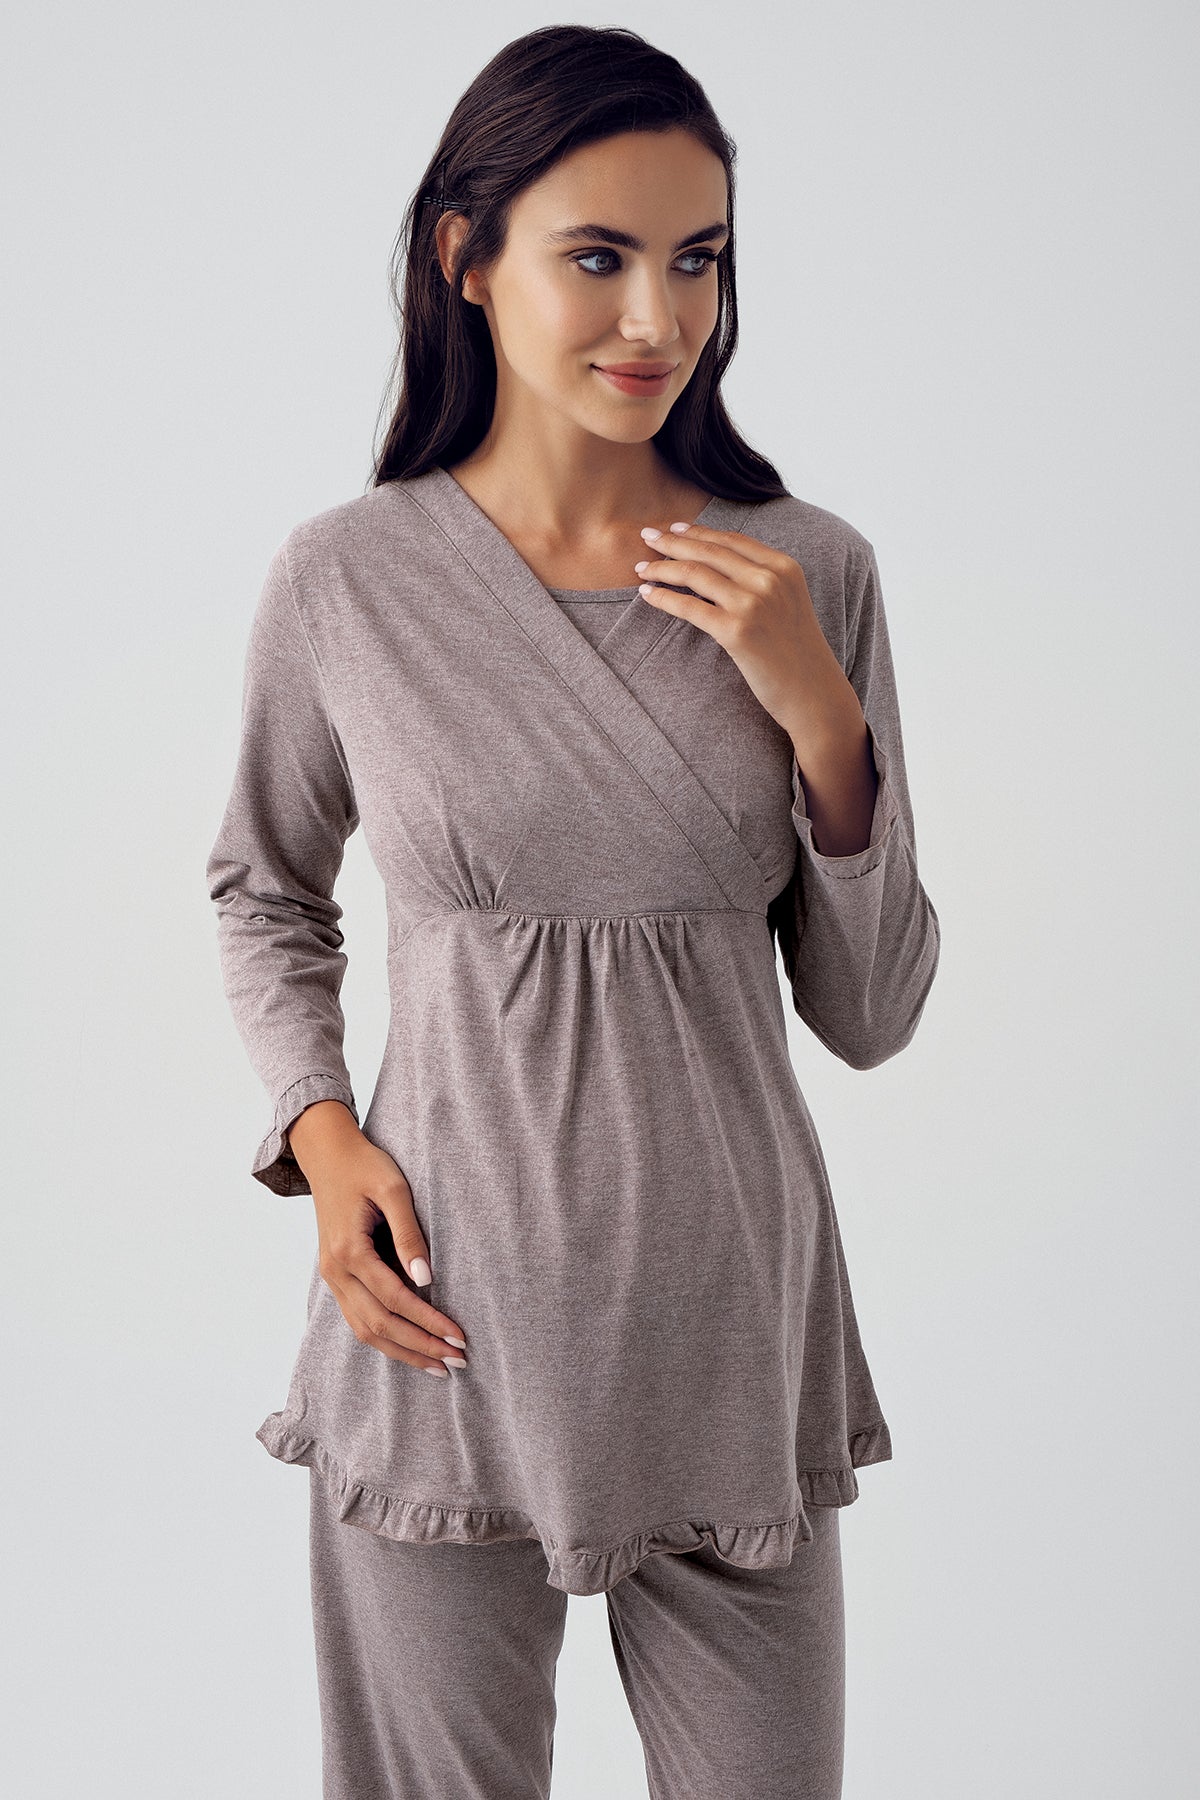 Shopymommy 15301 Double Breasted 3-Pieces Maternity & Nursing Pajamas With Knitwear Robe Coffee